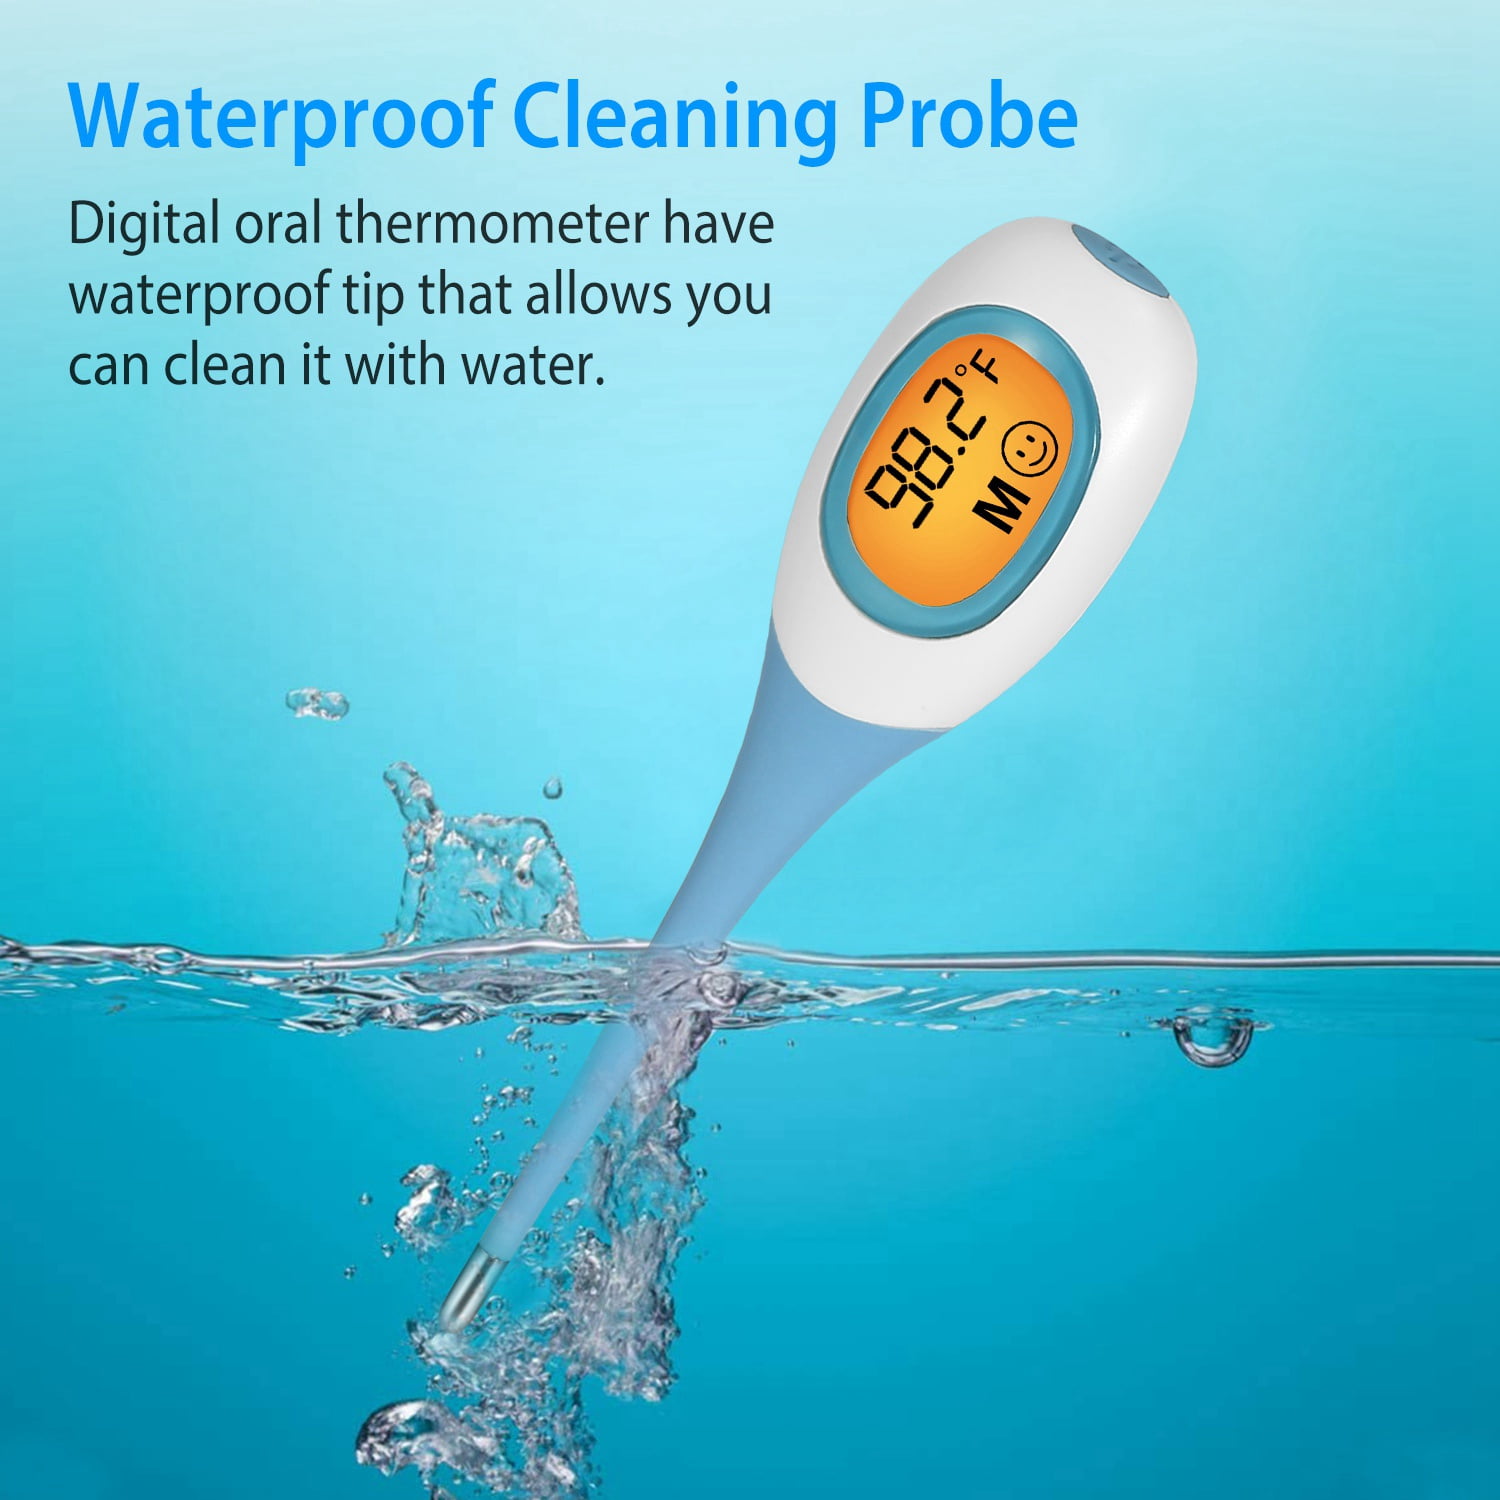 AMICIKART Waterproof Digital Shower Thermometer Auto Power Off Accurate  Meter For measuring water temperature Shower Thermometer Thermometer -  AMICIKART 